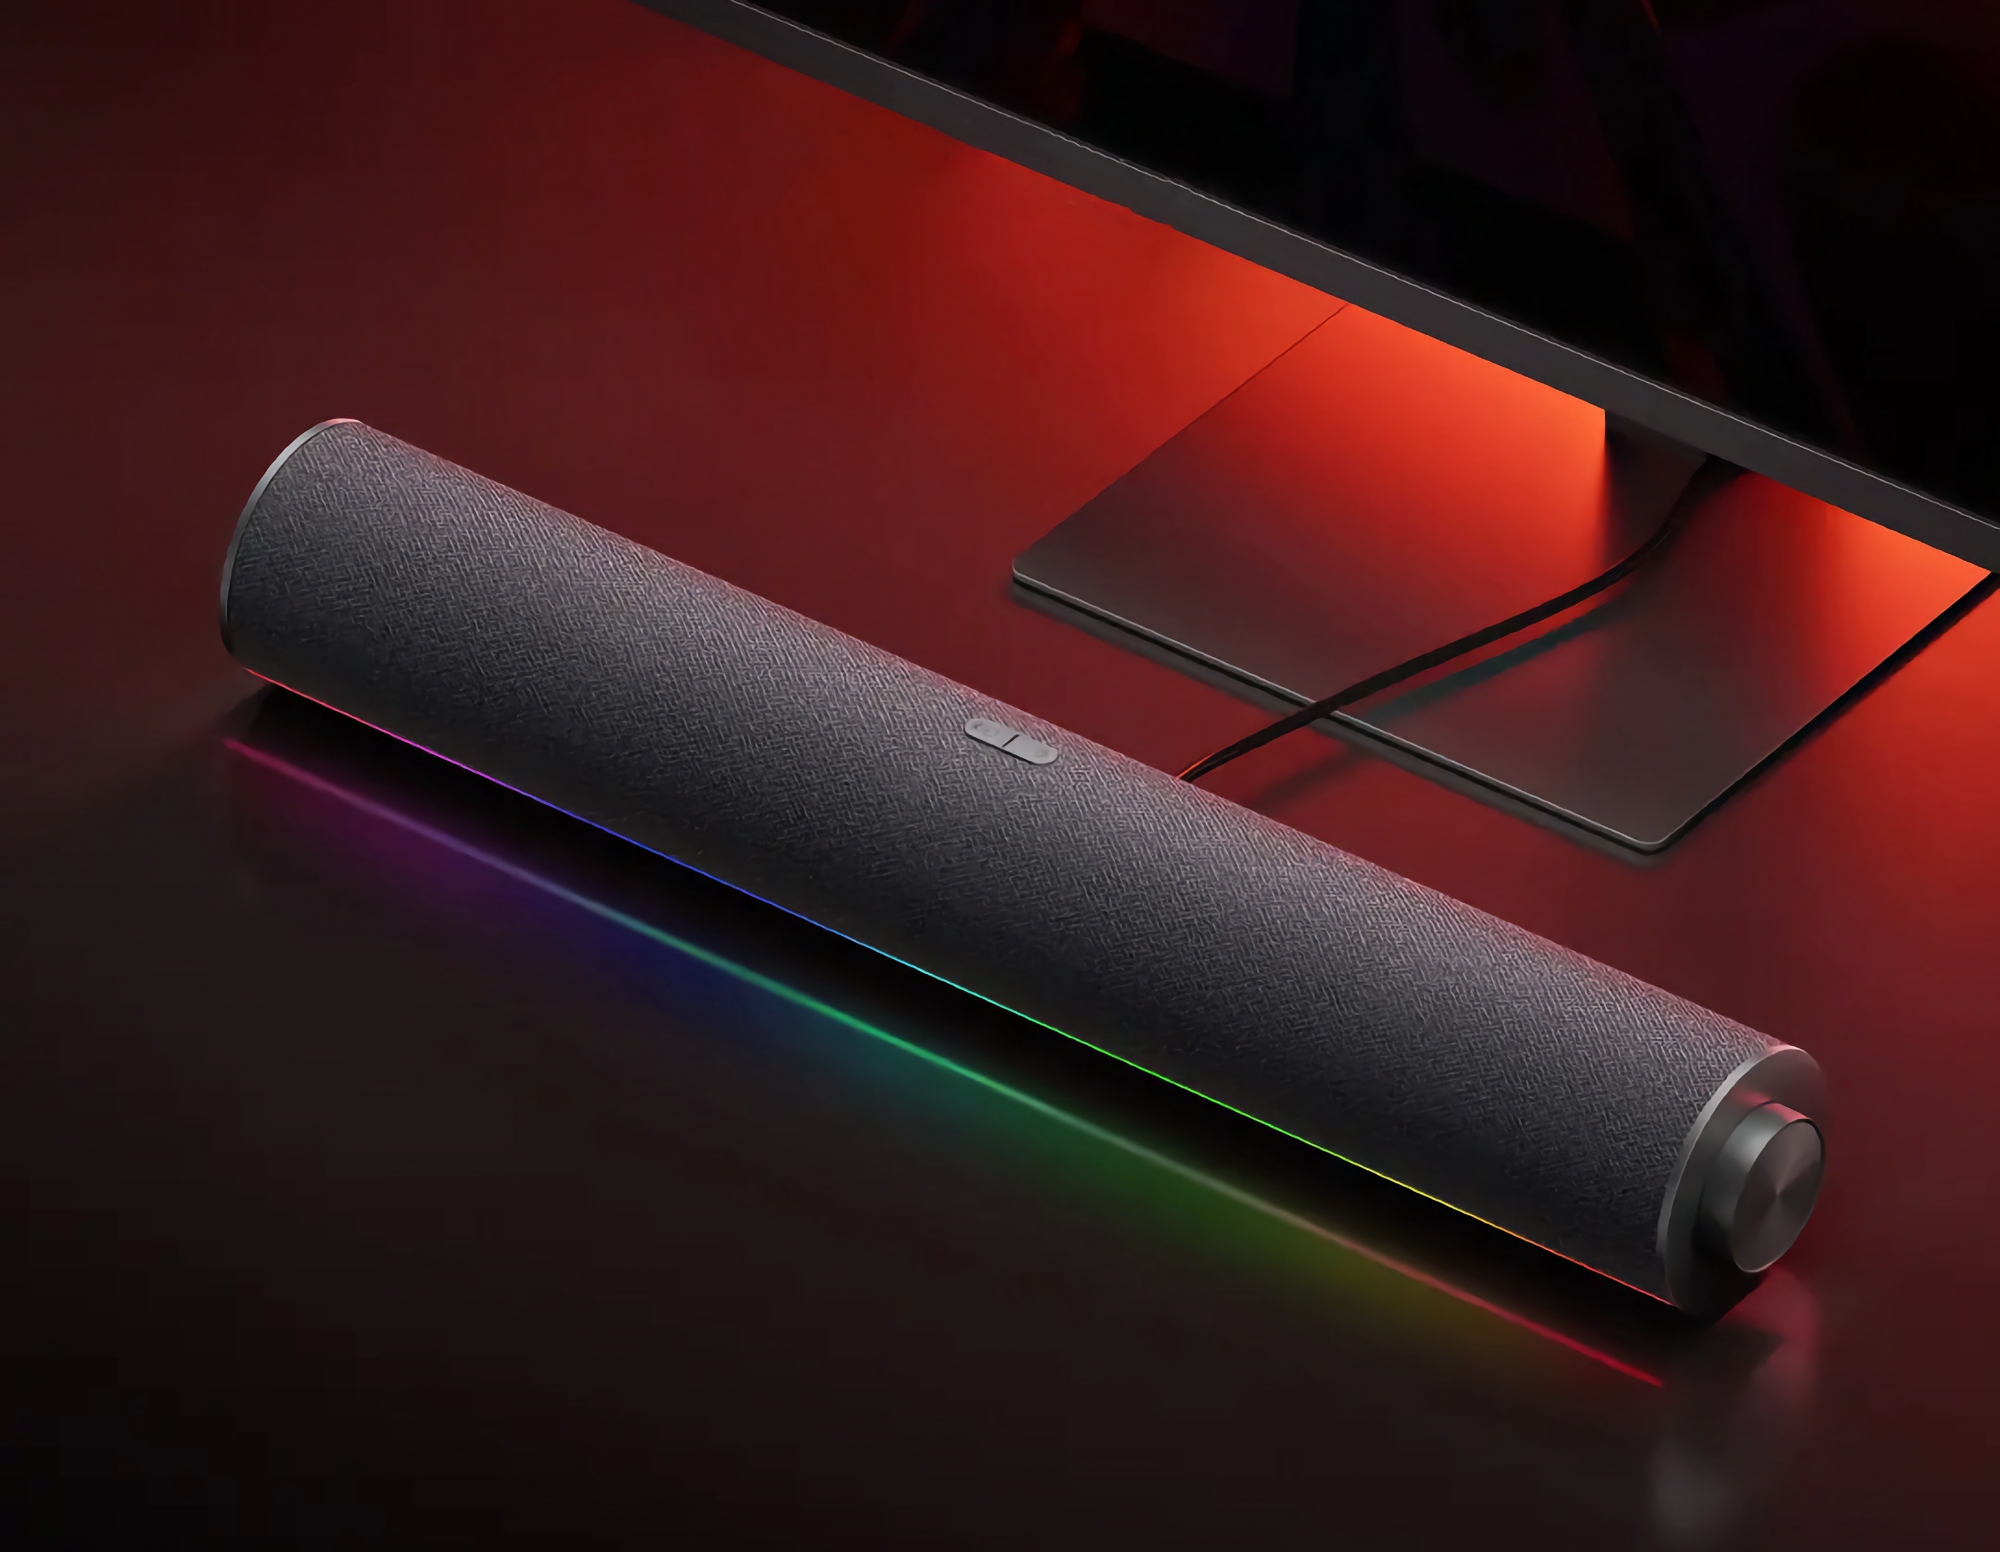 Xiaomi has unveiled Redmi Desktop Speaker with RGB backlighting for $27